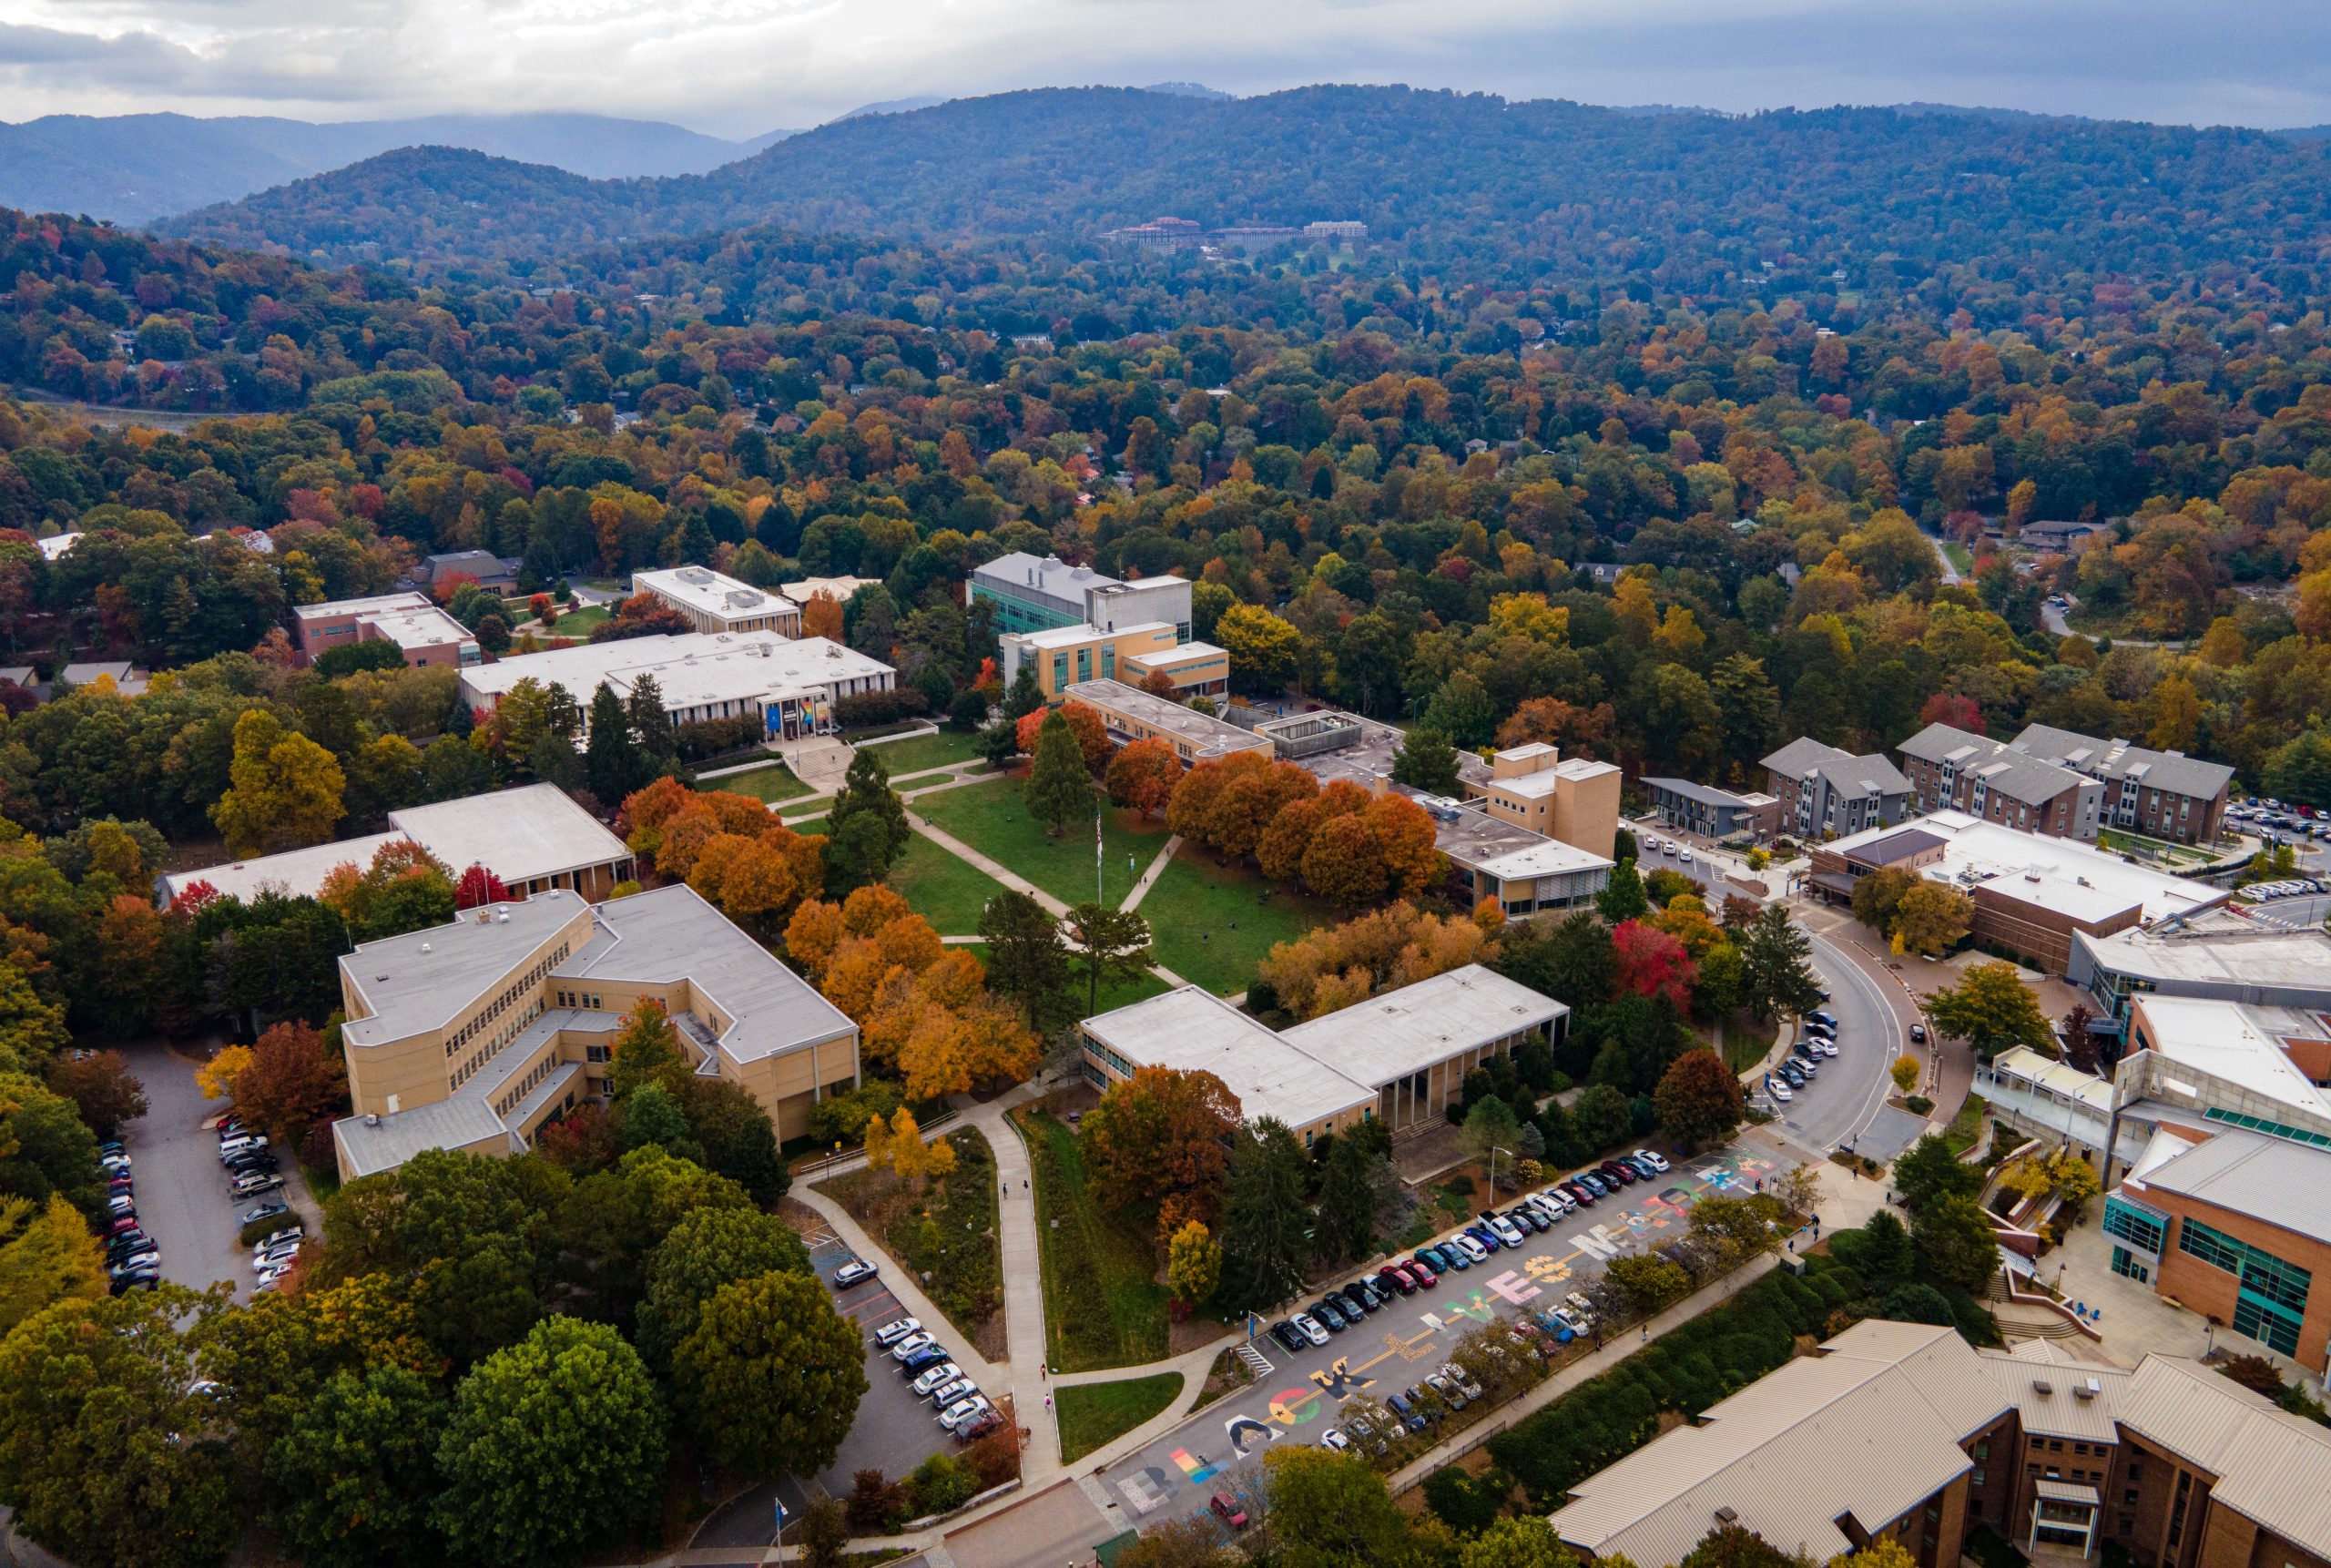 A drone shot of campus with mountains in the background